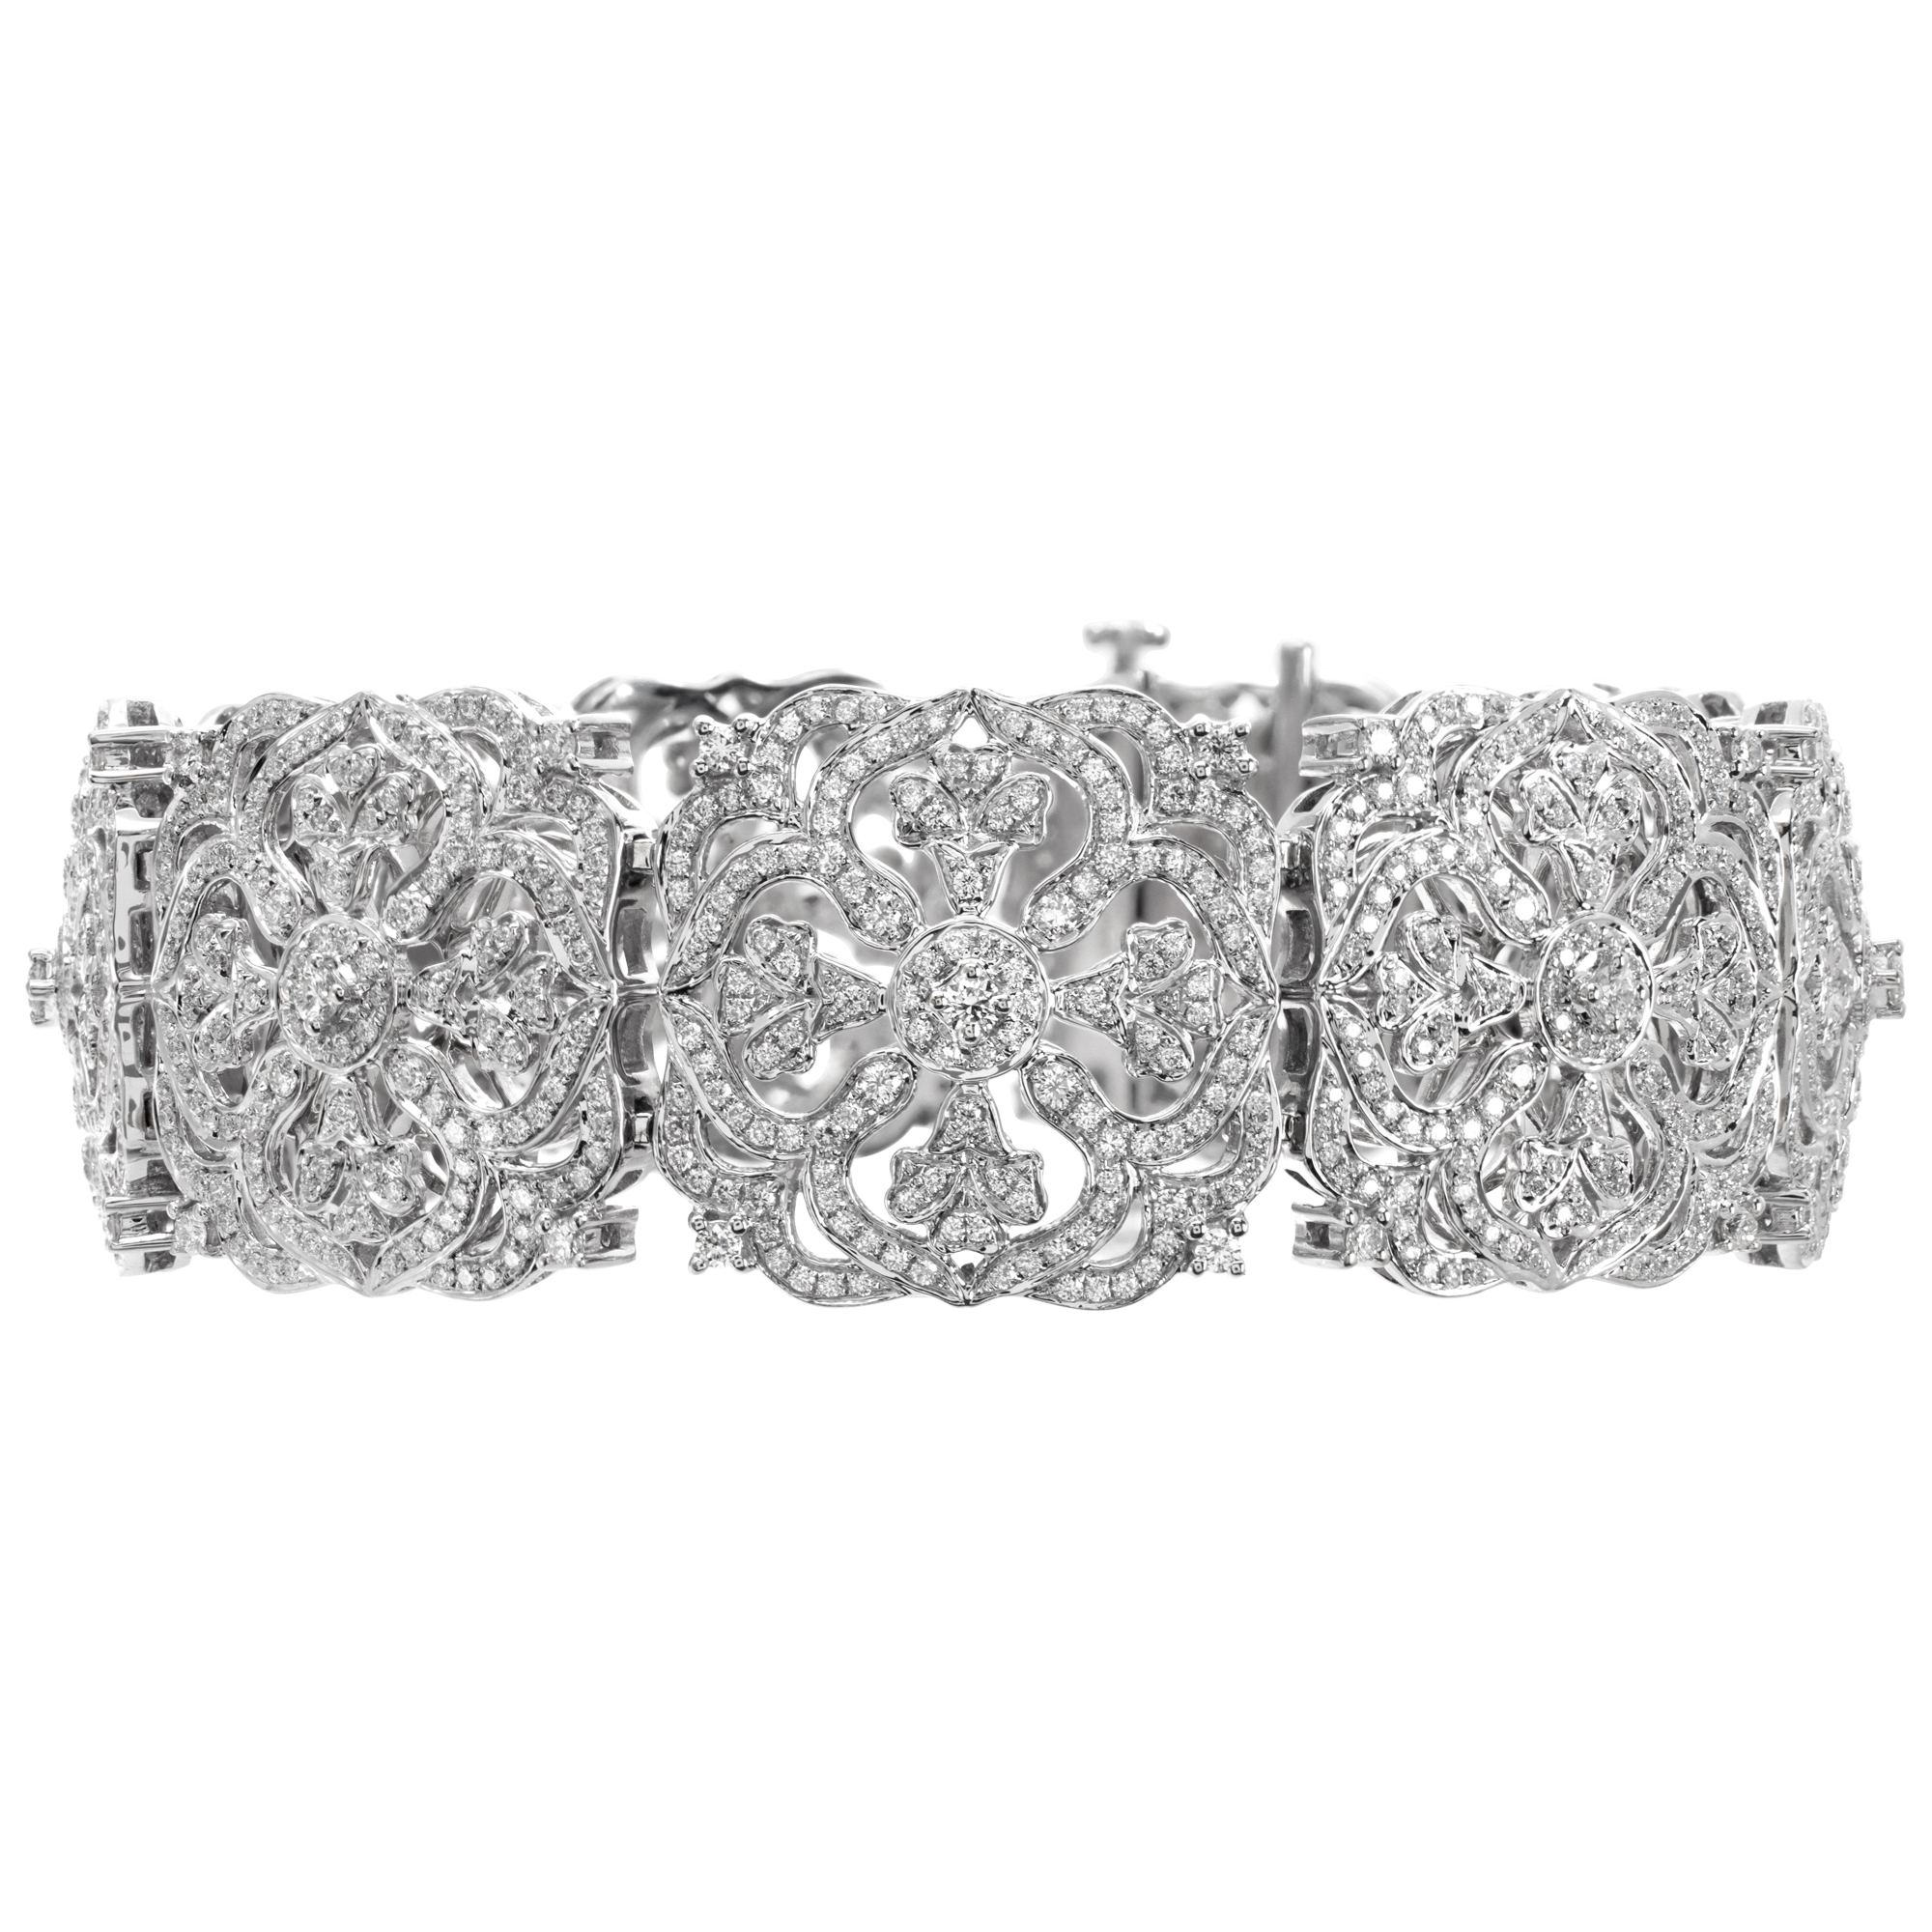 Charles Krypell diamond pave floral amulet bracelet in 18k white gold with approximately 9 carats in G-H, VS diamonds image 2